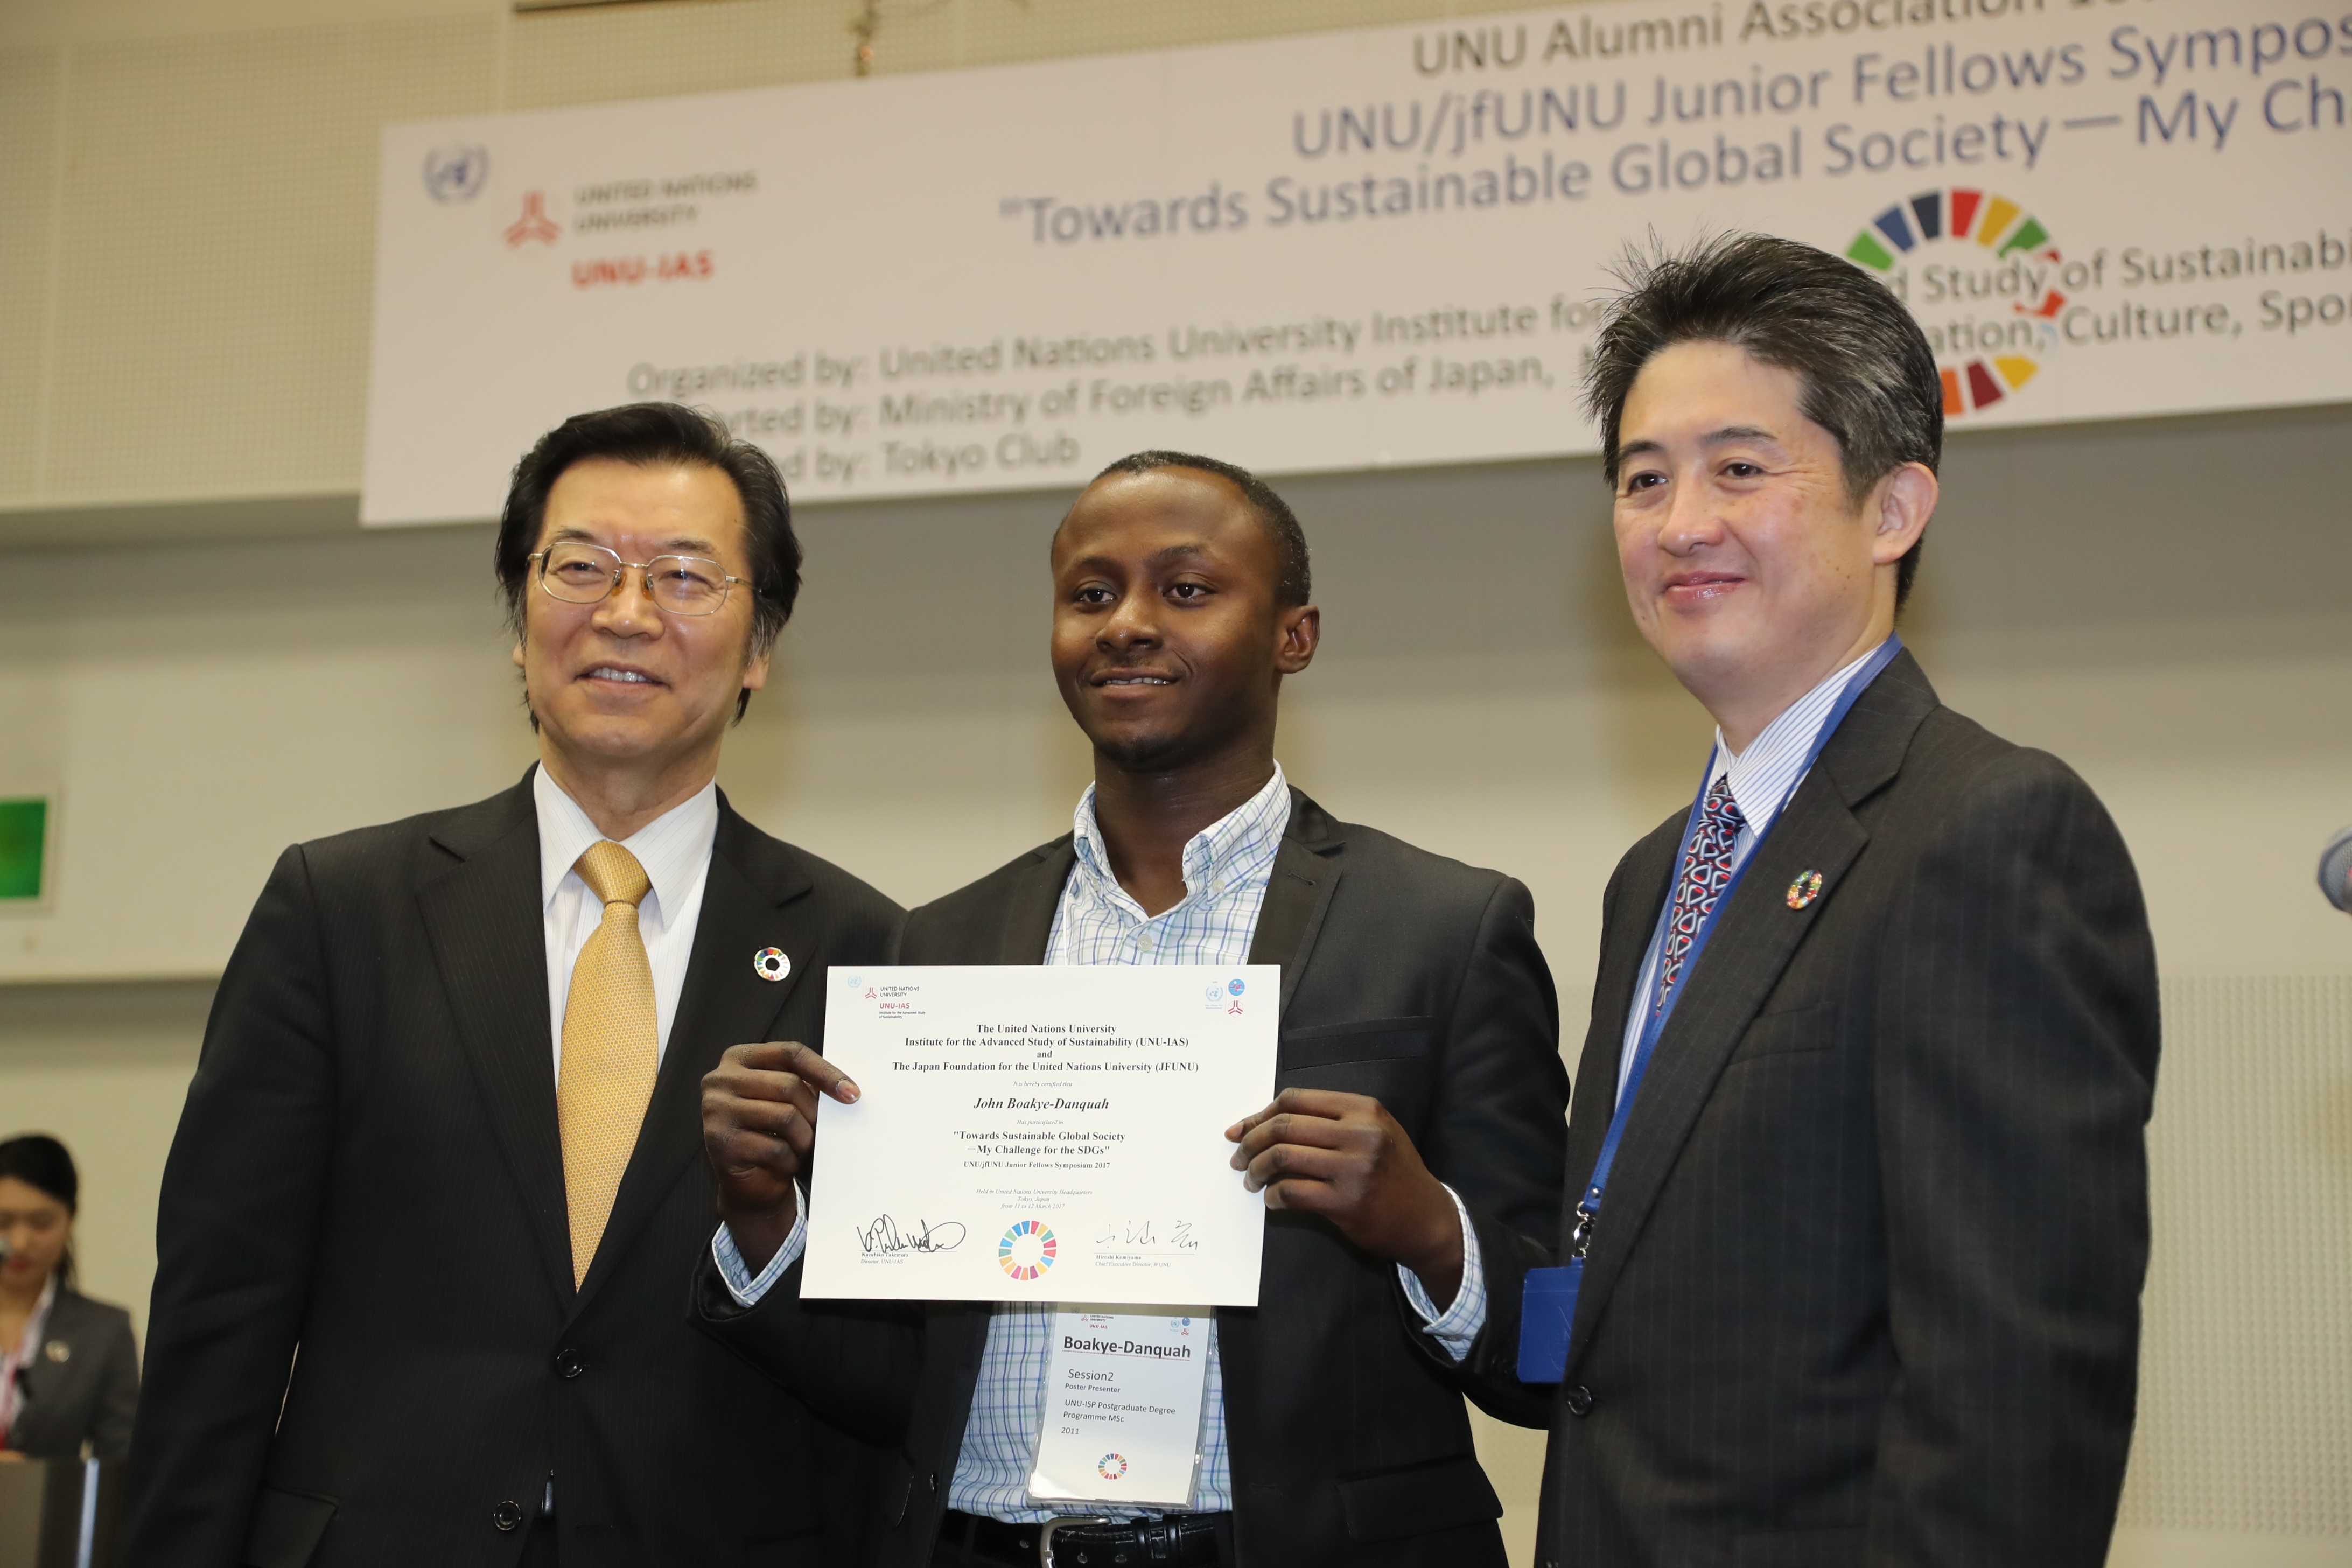 John showing a certificate of participation at the UNU Alumni symposium